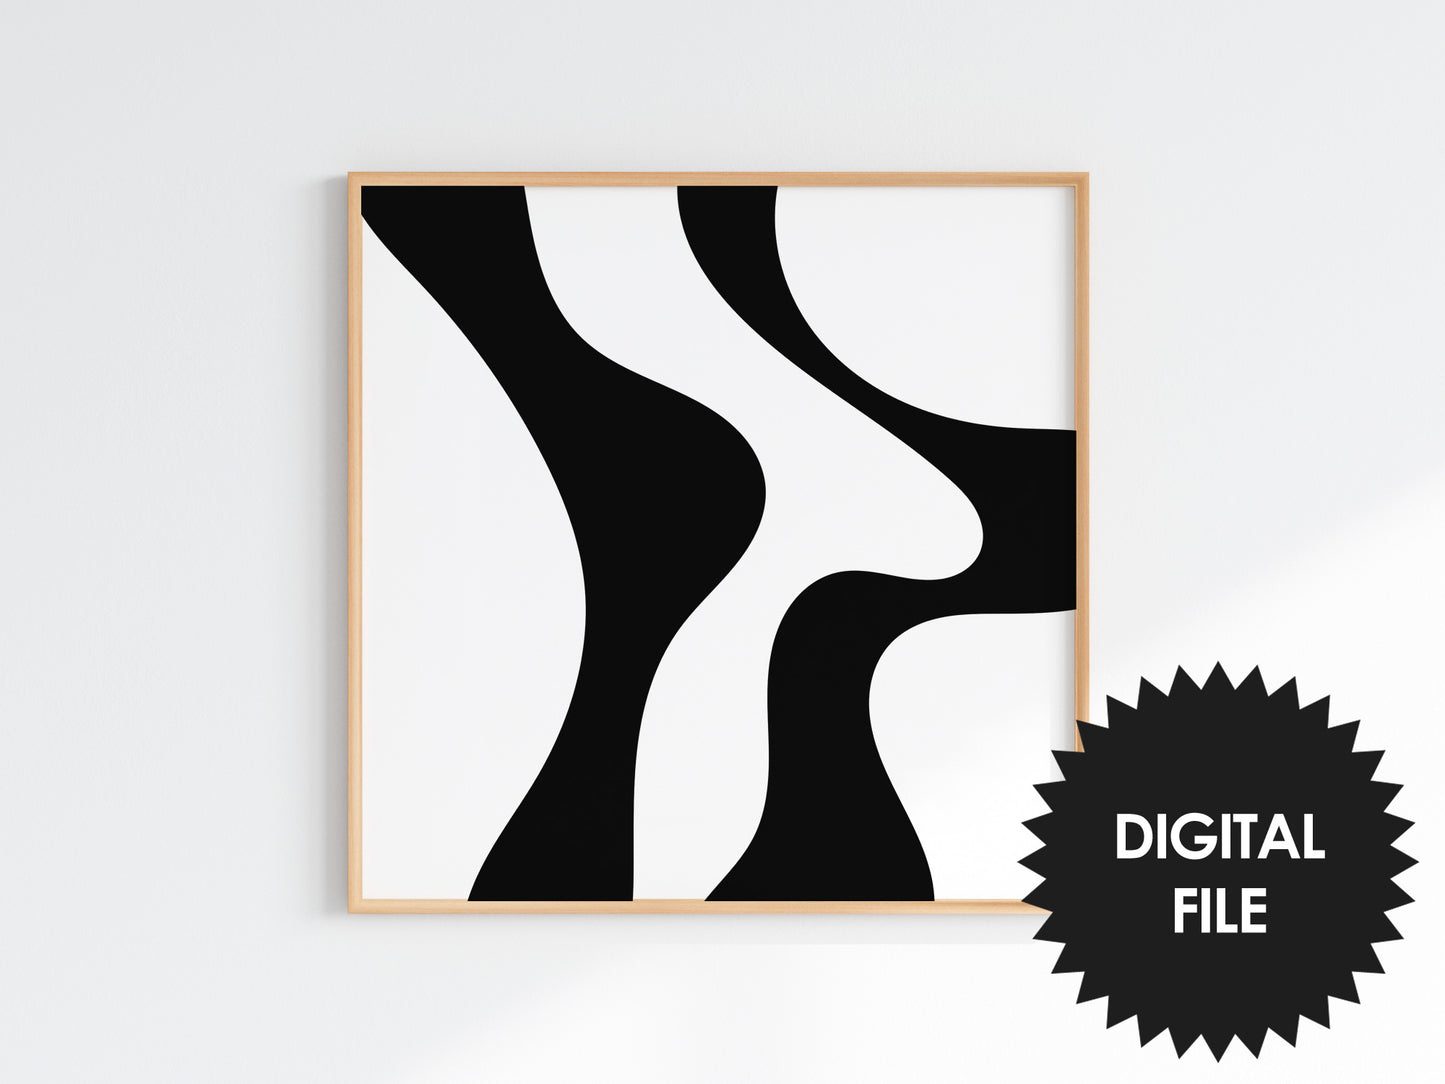 Wiggle Lines Abstract Art Print, Set of 3, Black & White Wall Art, Digital Art Poster Download, Modern Square Art Prints, Print Up To 20x20inch